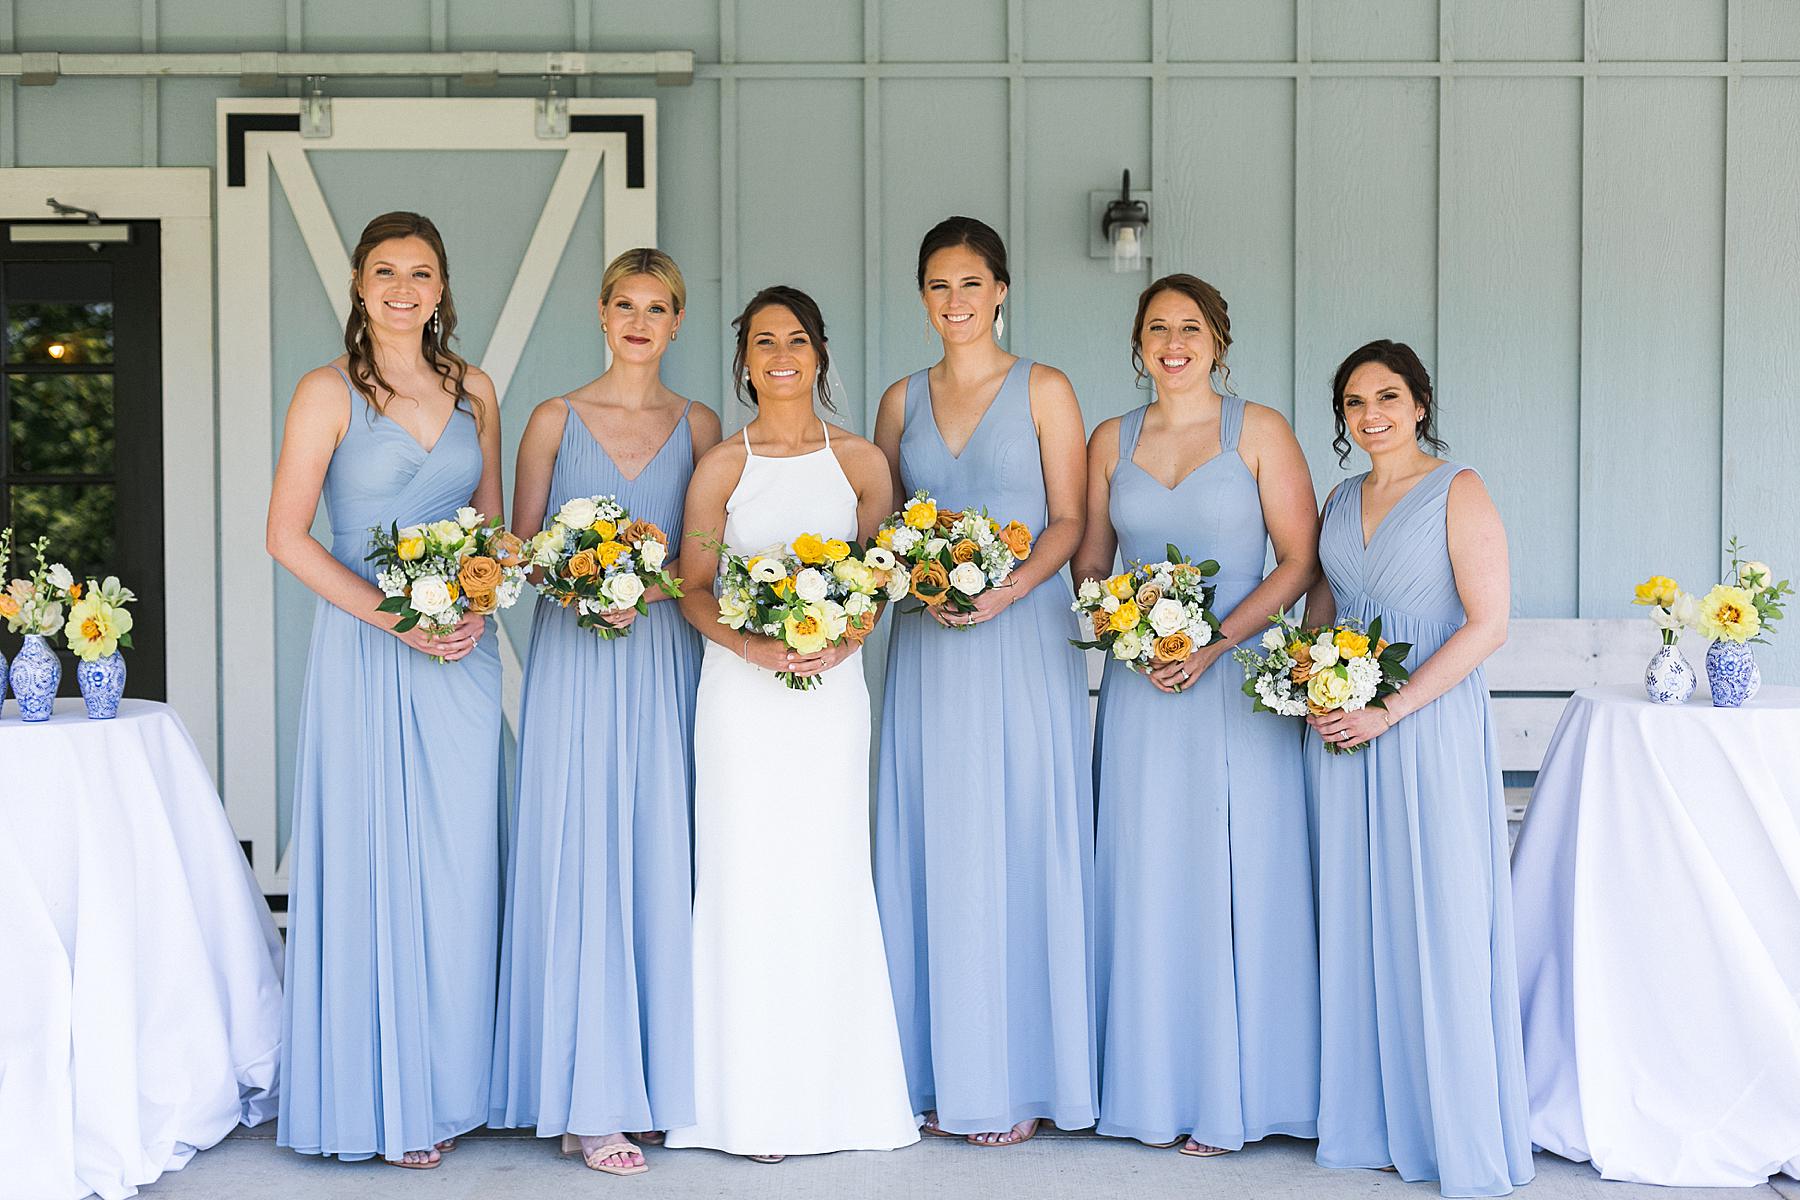 bride and bridesmaid bouquets in yellow, white, and orange, wearing blue dresses